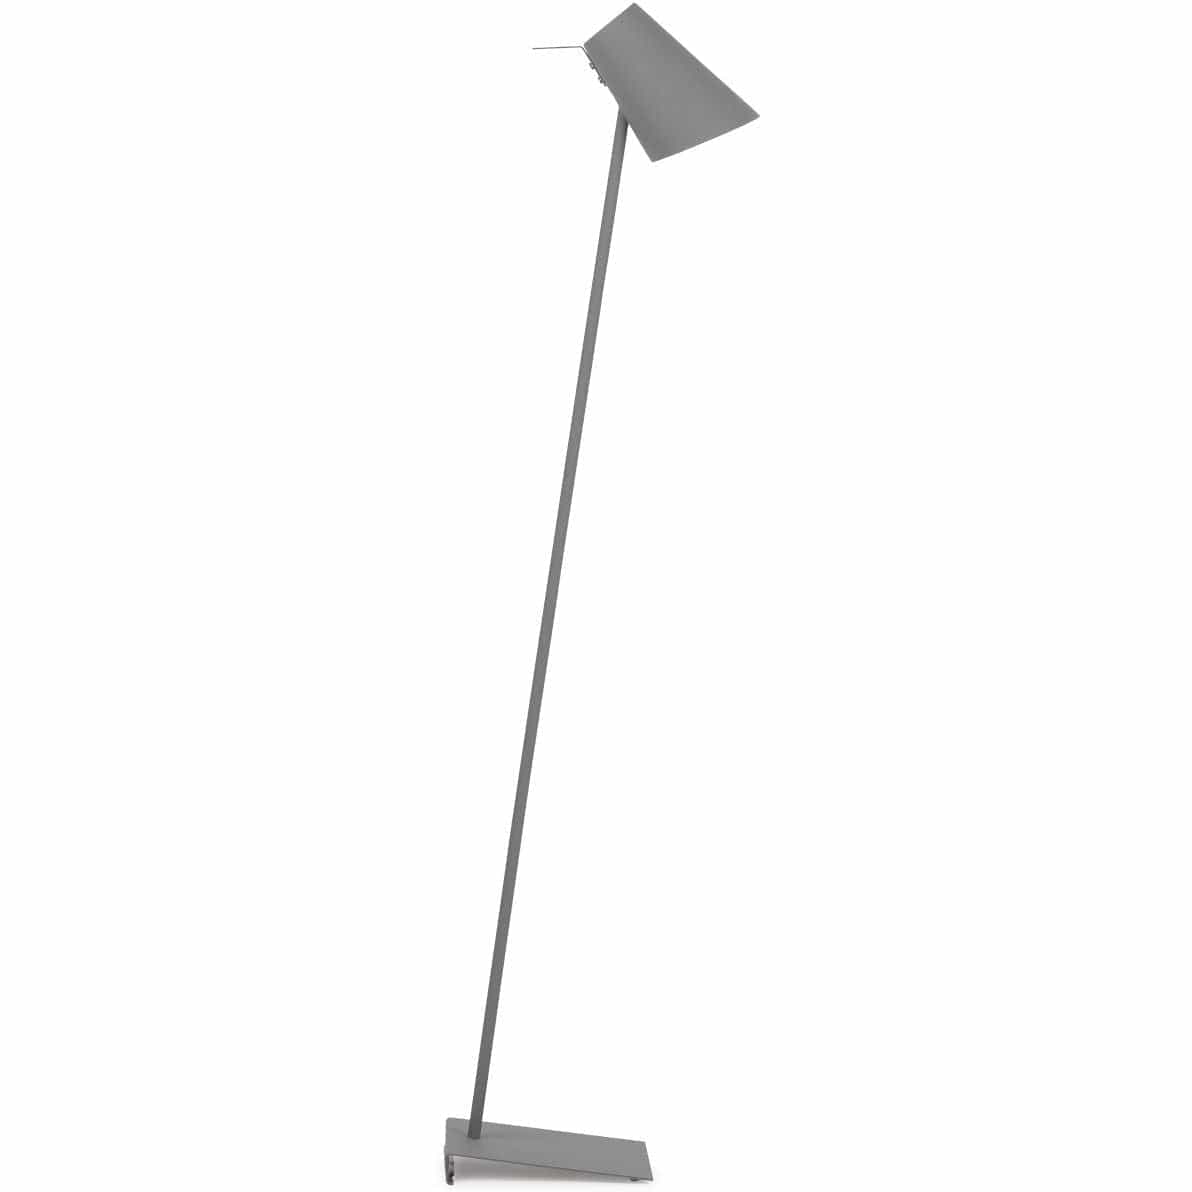 It's About RoMi Floor Lamp Grey Cardiff Rubber Finish Floor Lamp, white, grey or black